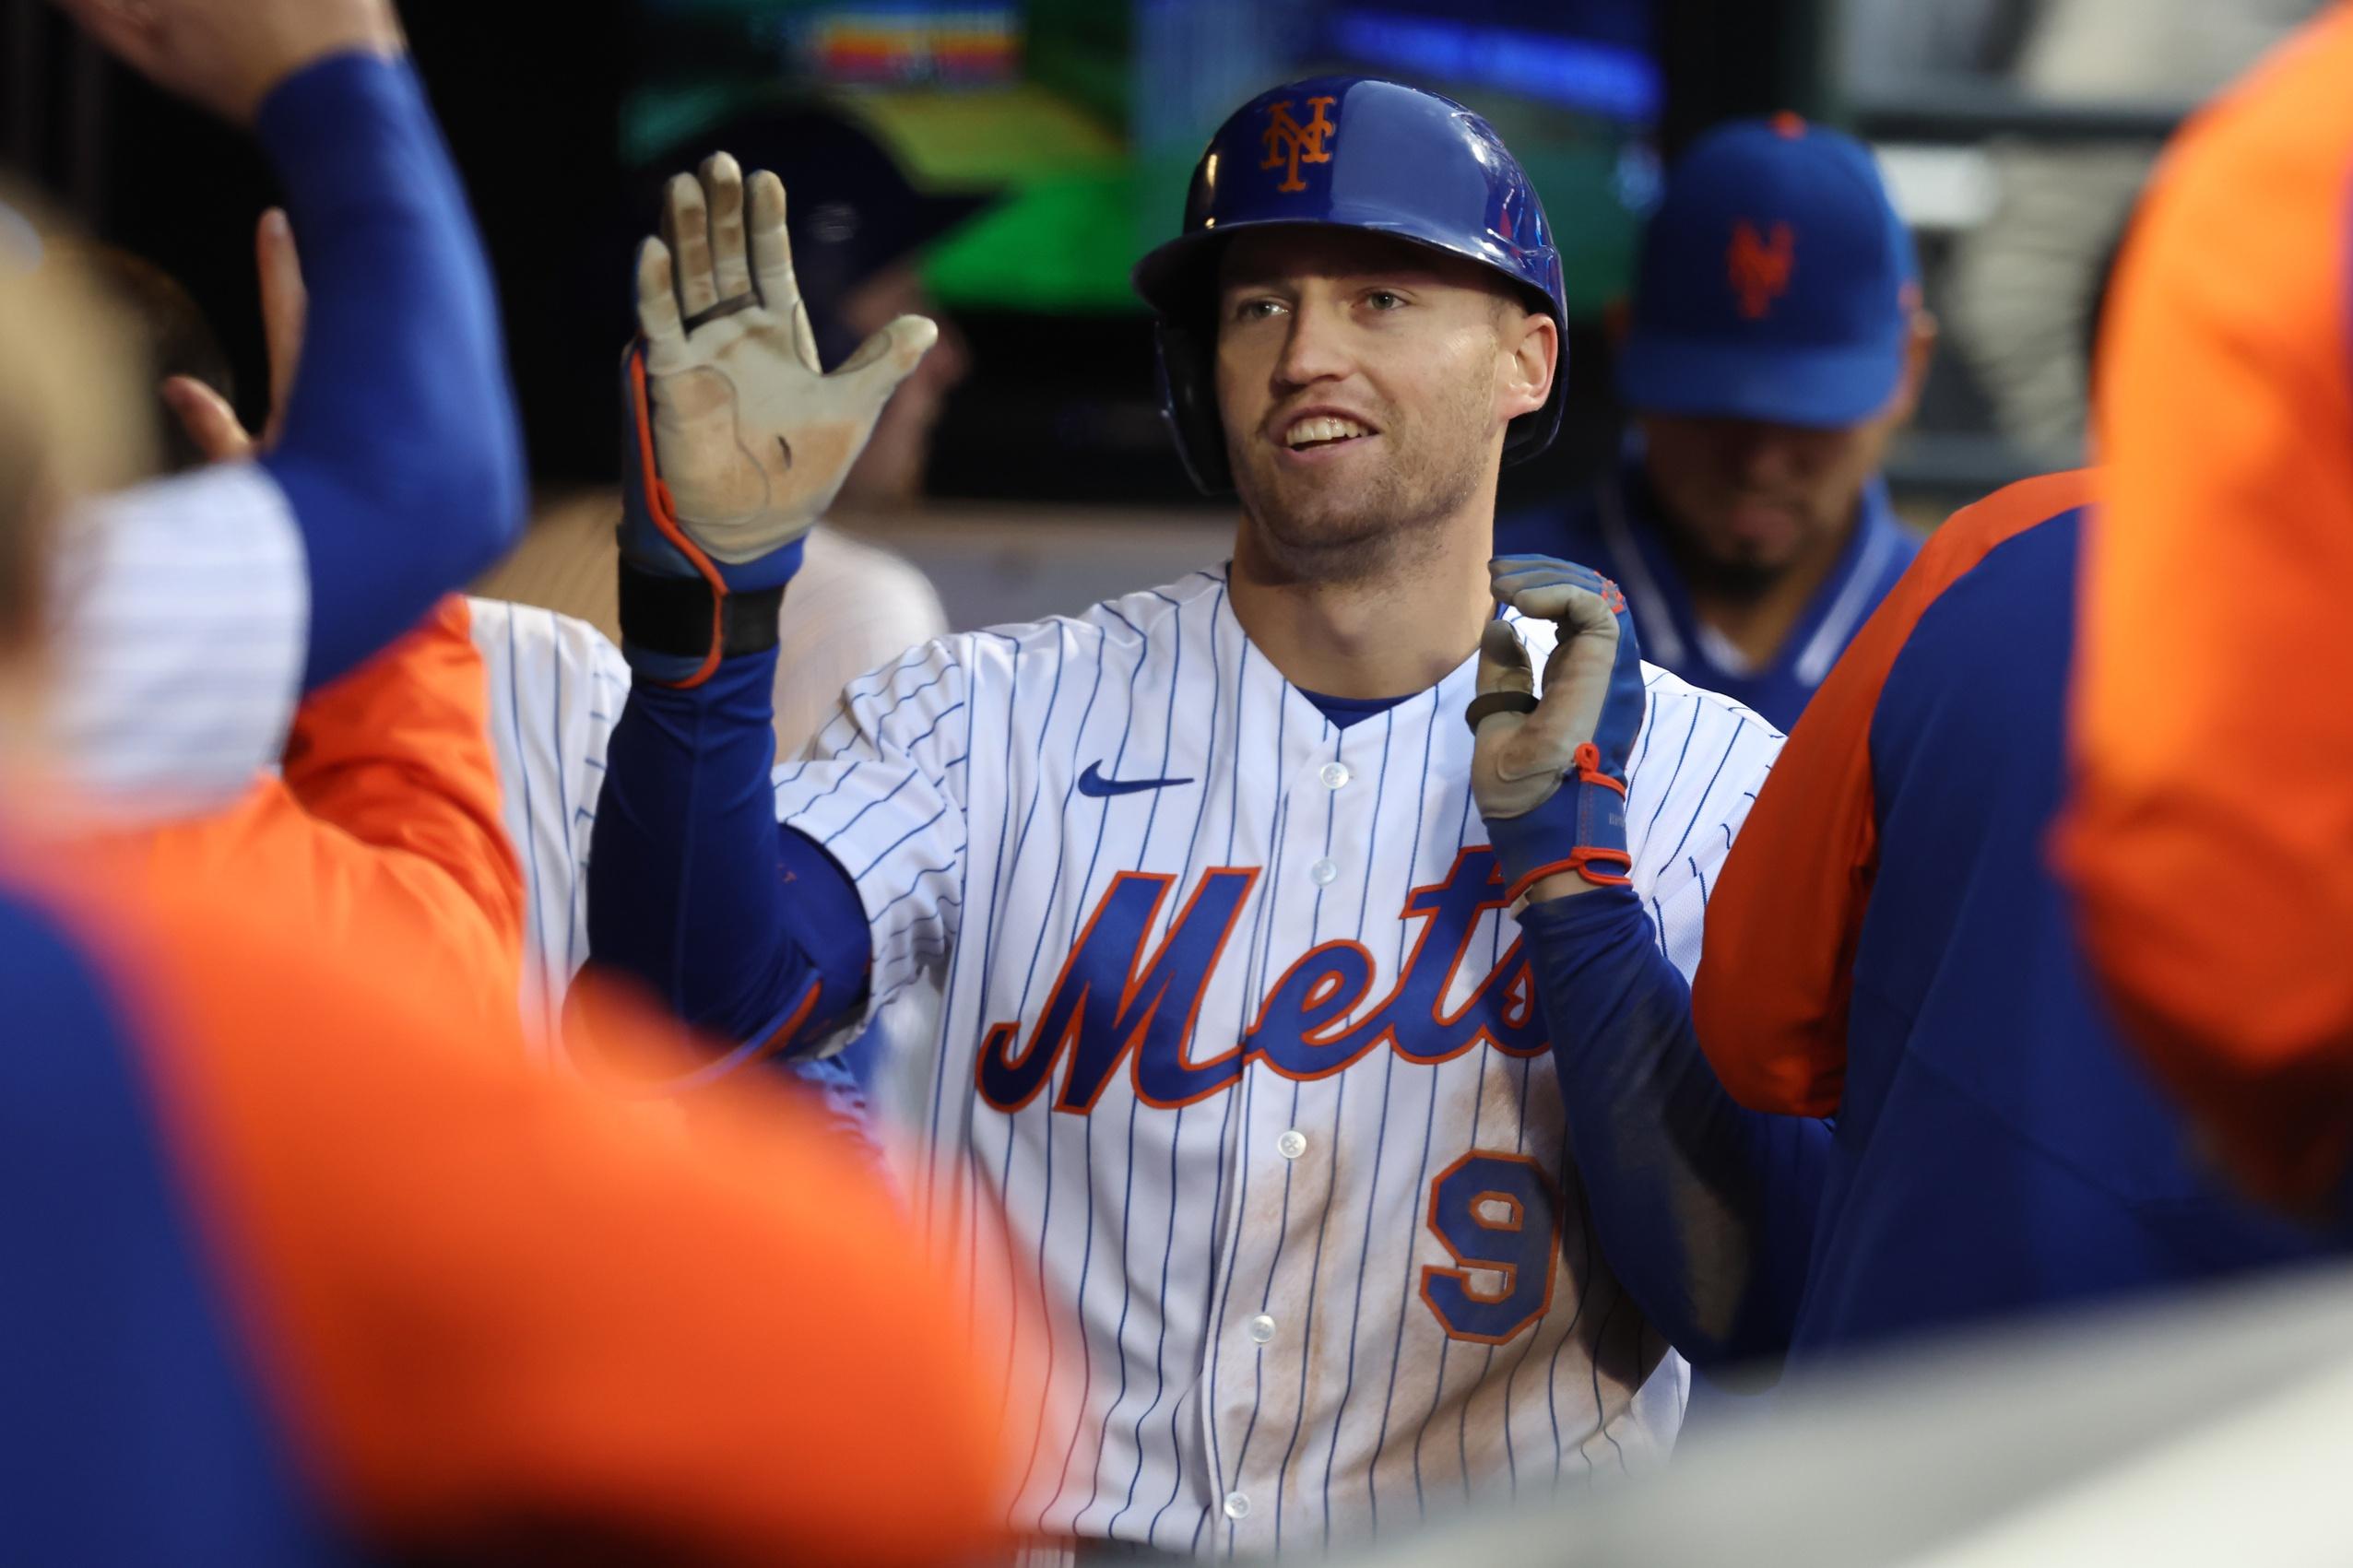 New York Mets center fielder Brandon Nimmo (9) celebrates his solo home run against the Washington Nationals with teammates in the dugout during the fourth inning at Citi Field. / Brad Penner-USA TODAY Sports